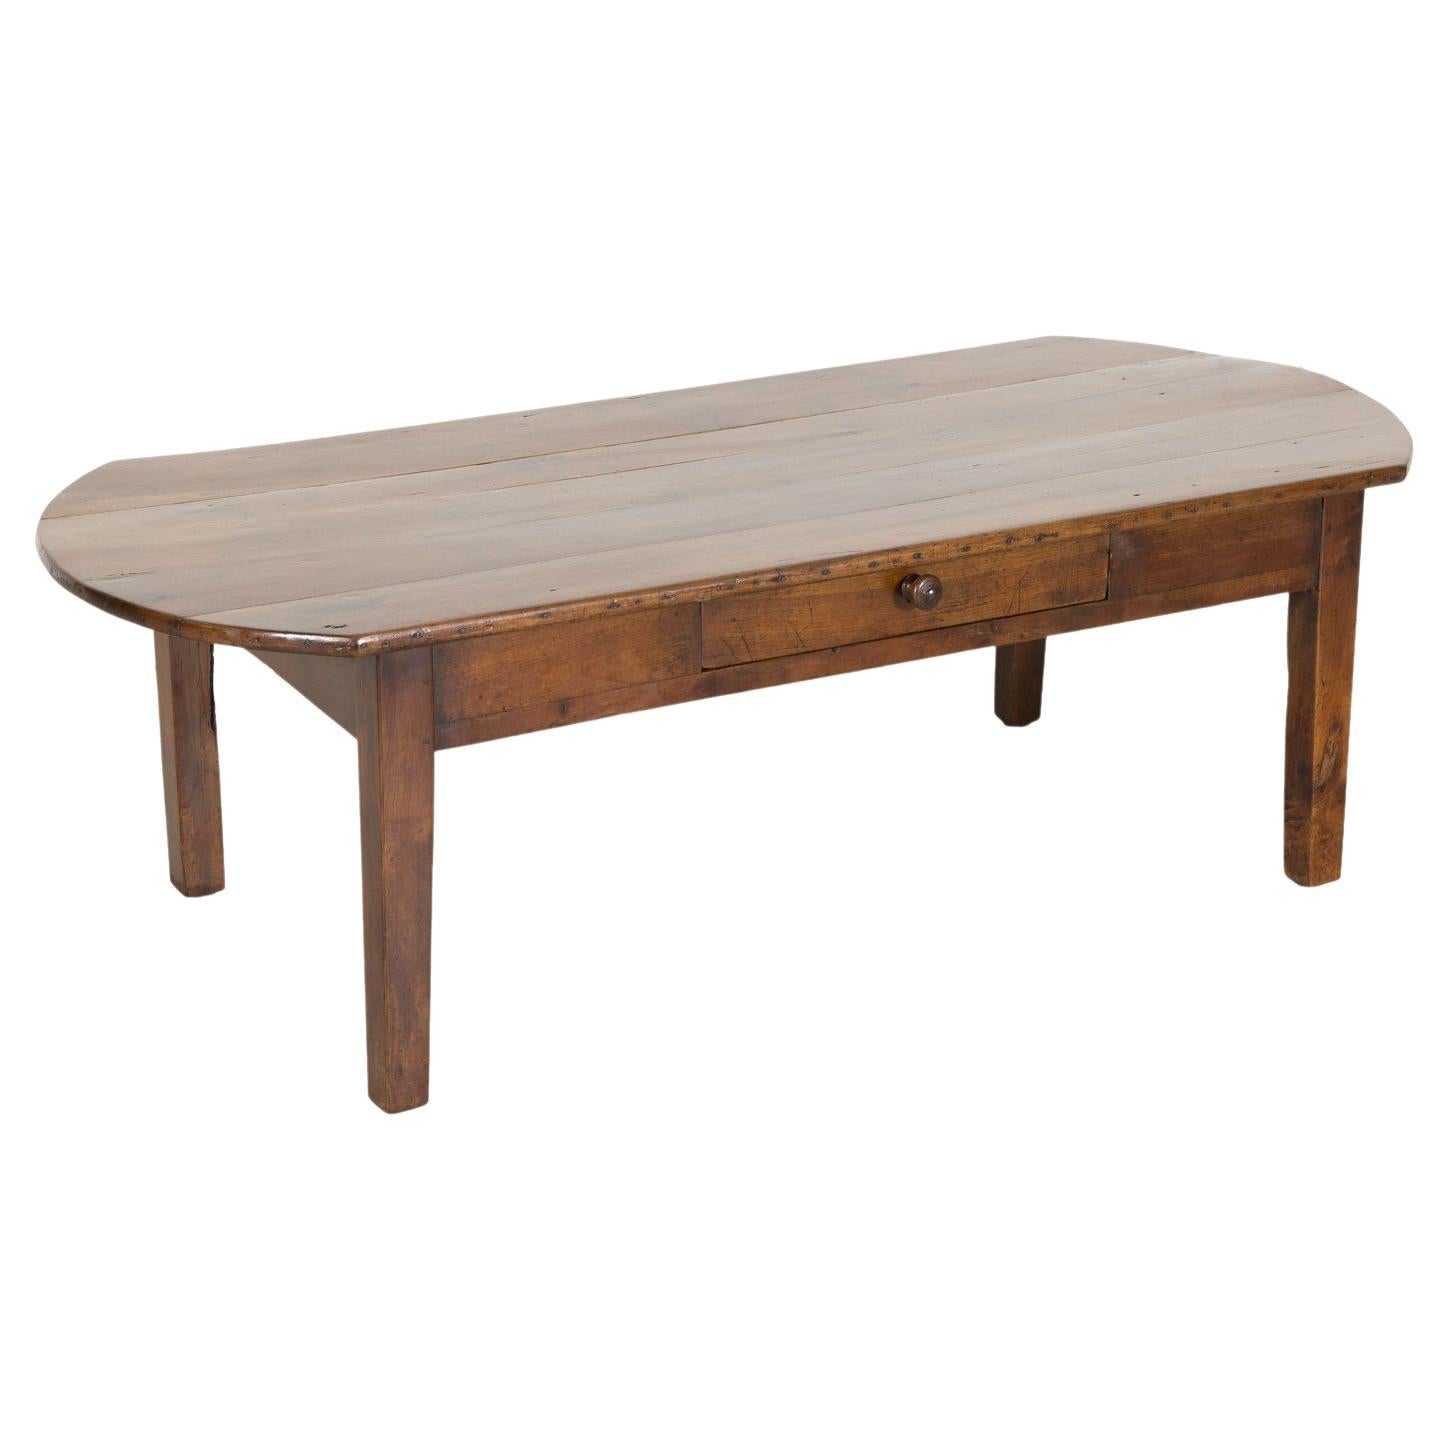 19th Century Country French Solid Cherry Oval Coffee Table with Drawer